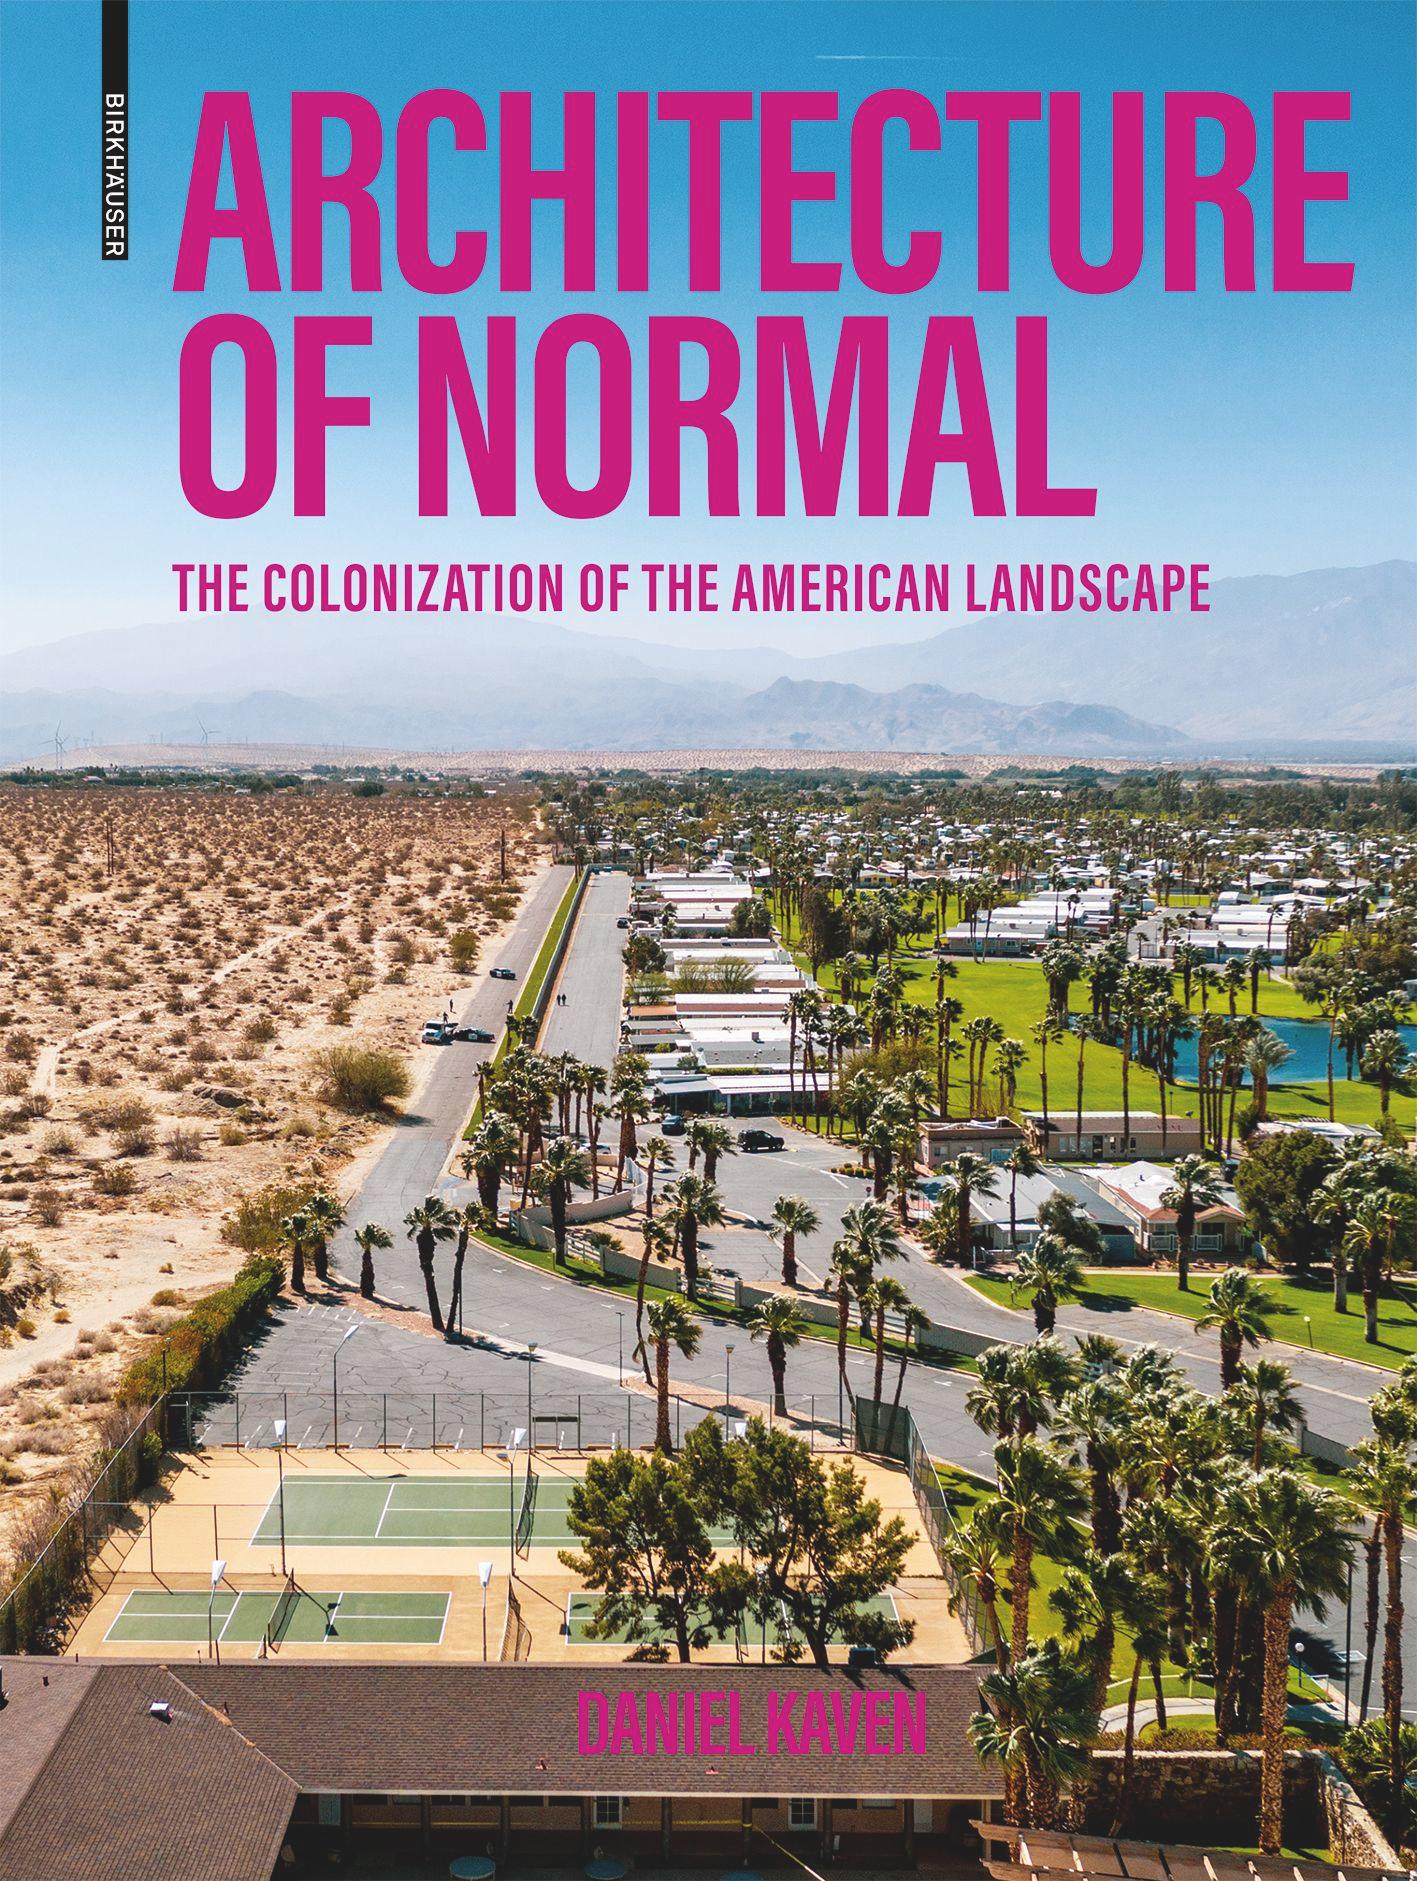 Architecture of Normal's cover